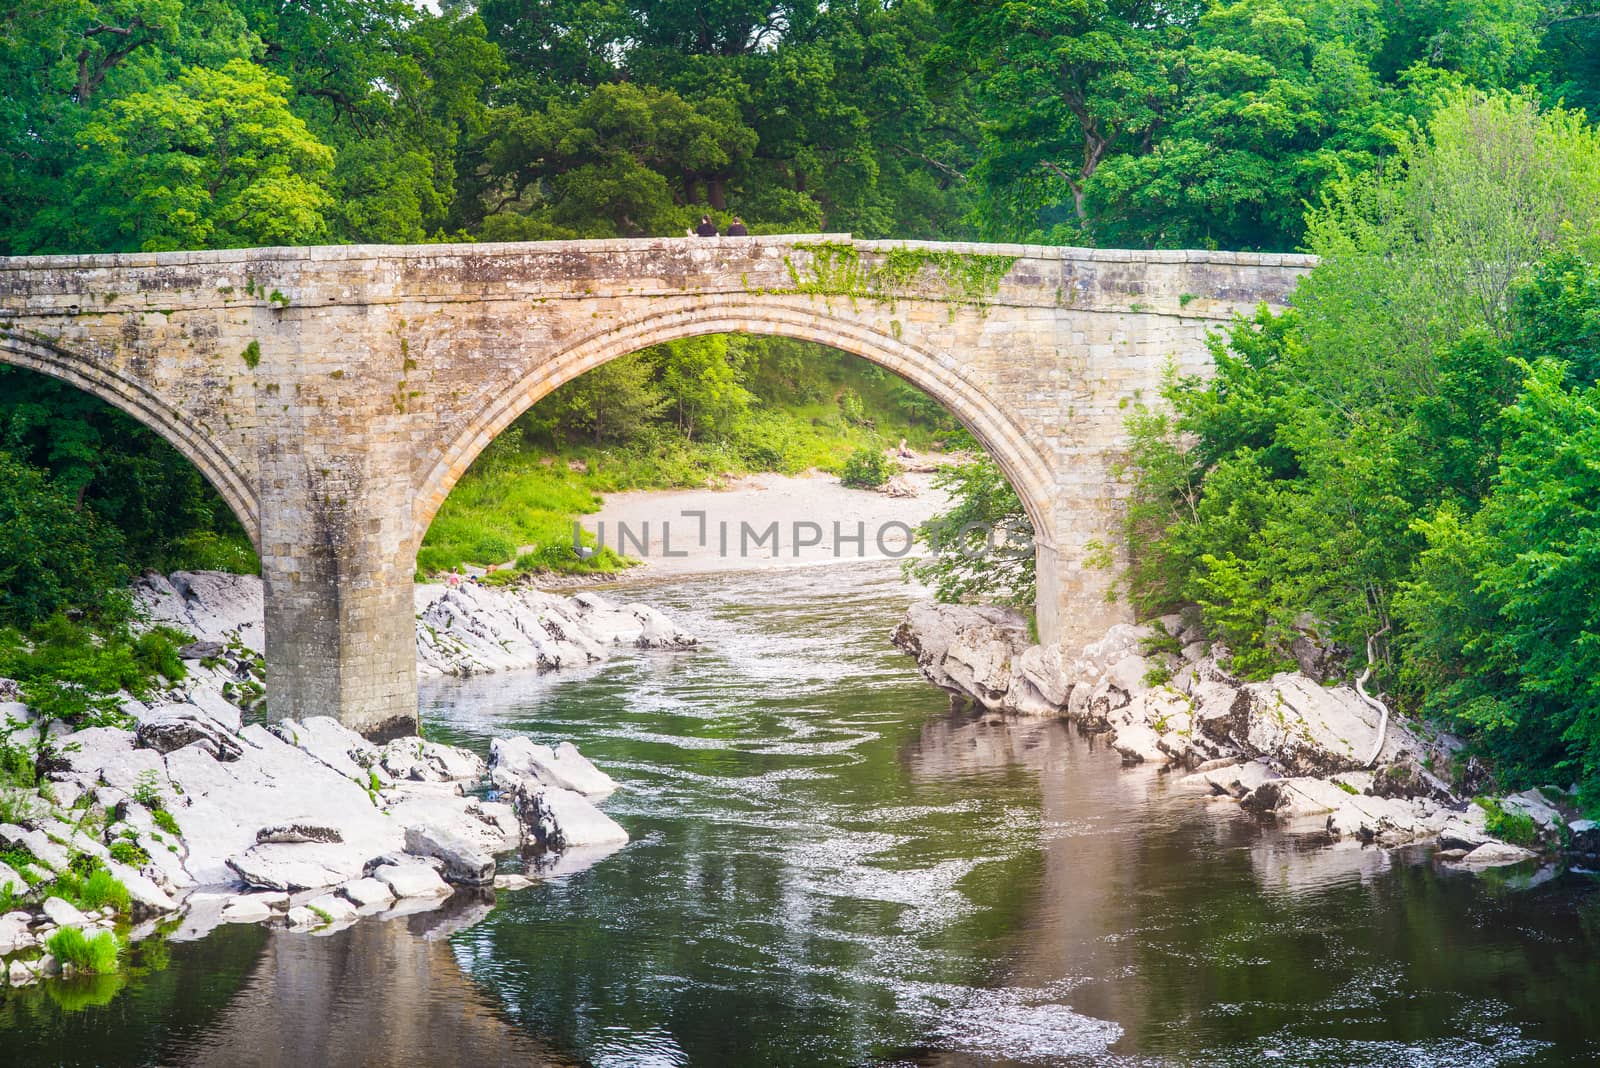 A view of Devils Bridge, a famous landmark on the river Lune near Kirkby Lonsdale, Cumbria, UK by paddythegolfer